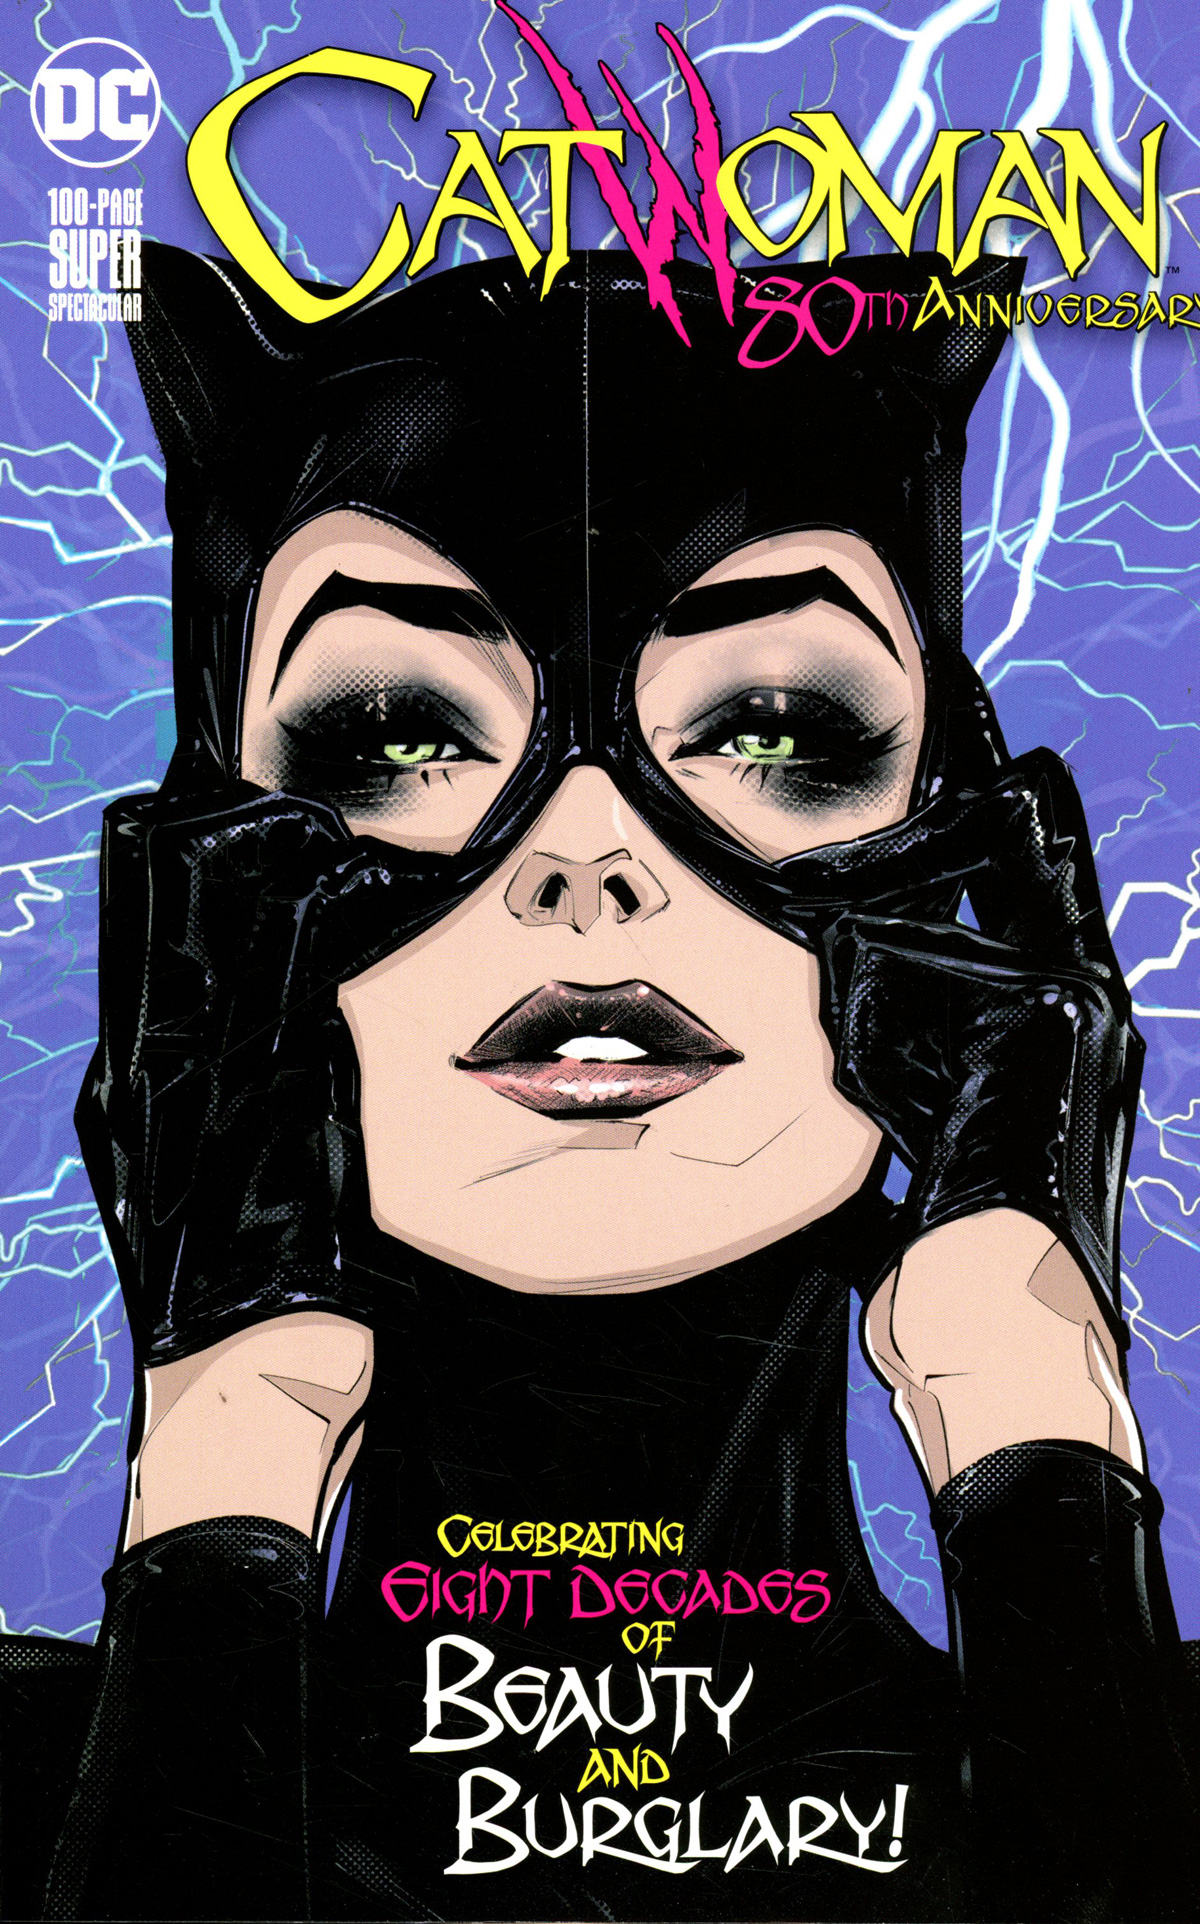 Catwoman 80th Anniversary 100-Page Super Spectacular #1 Cover A Regular Joelle Jones Cover